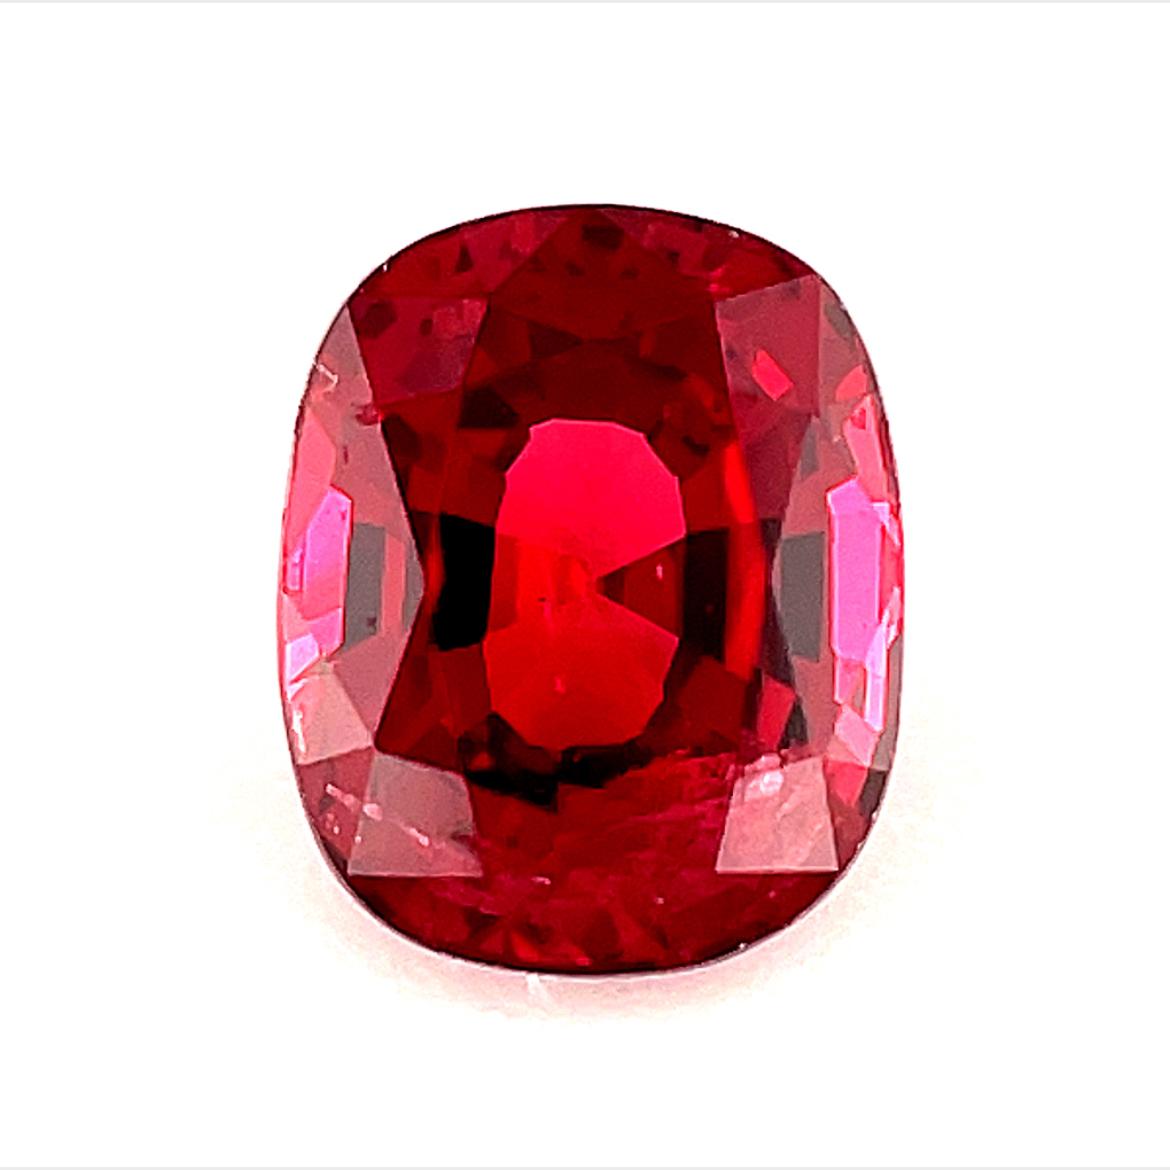 .85 Carat Cushion Cut Unset Loose Unmounted Red Spinel Gemstone For Sale 2